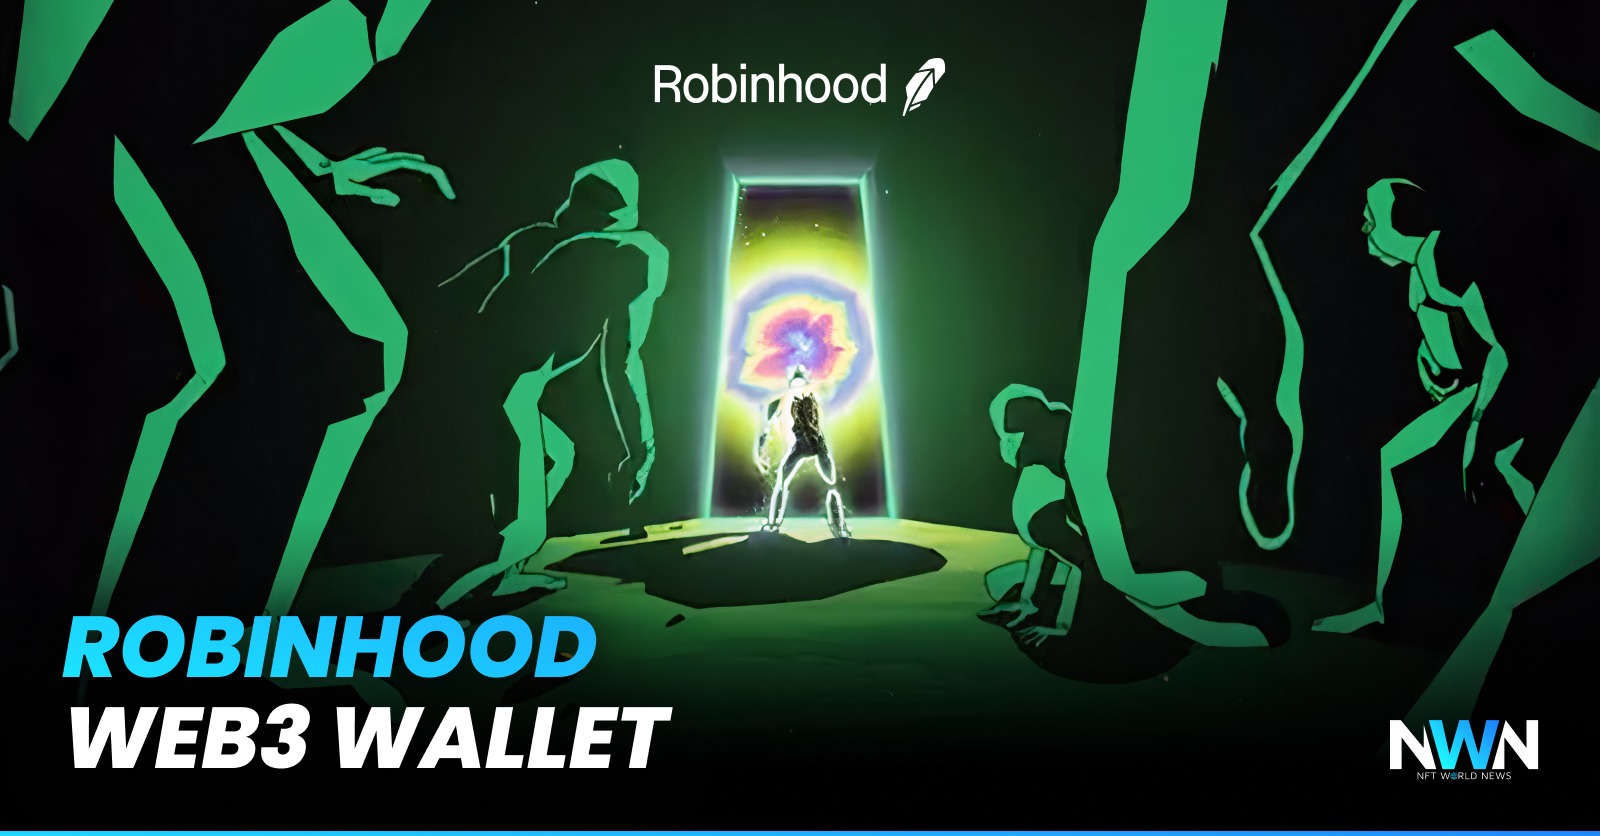 Robinhood Preparing to Enter The NFT Market with New Web3 Wallet